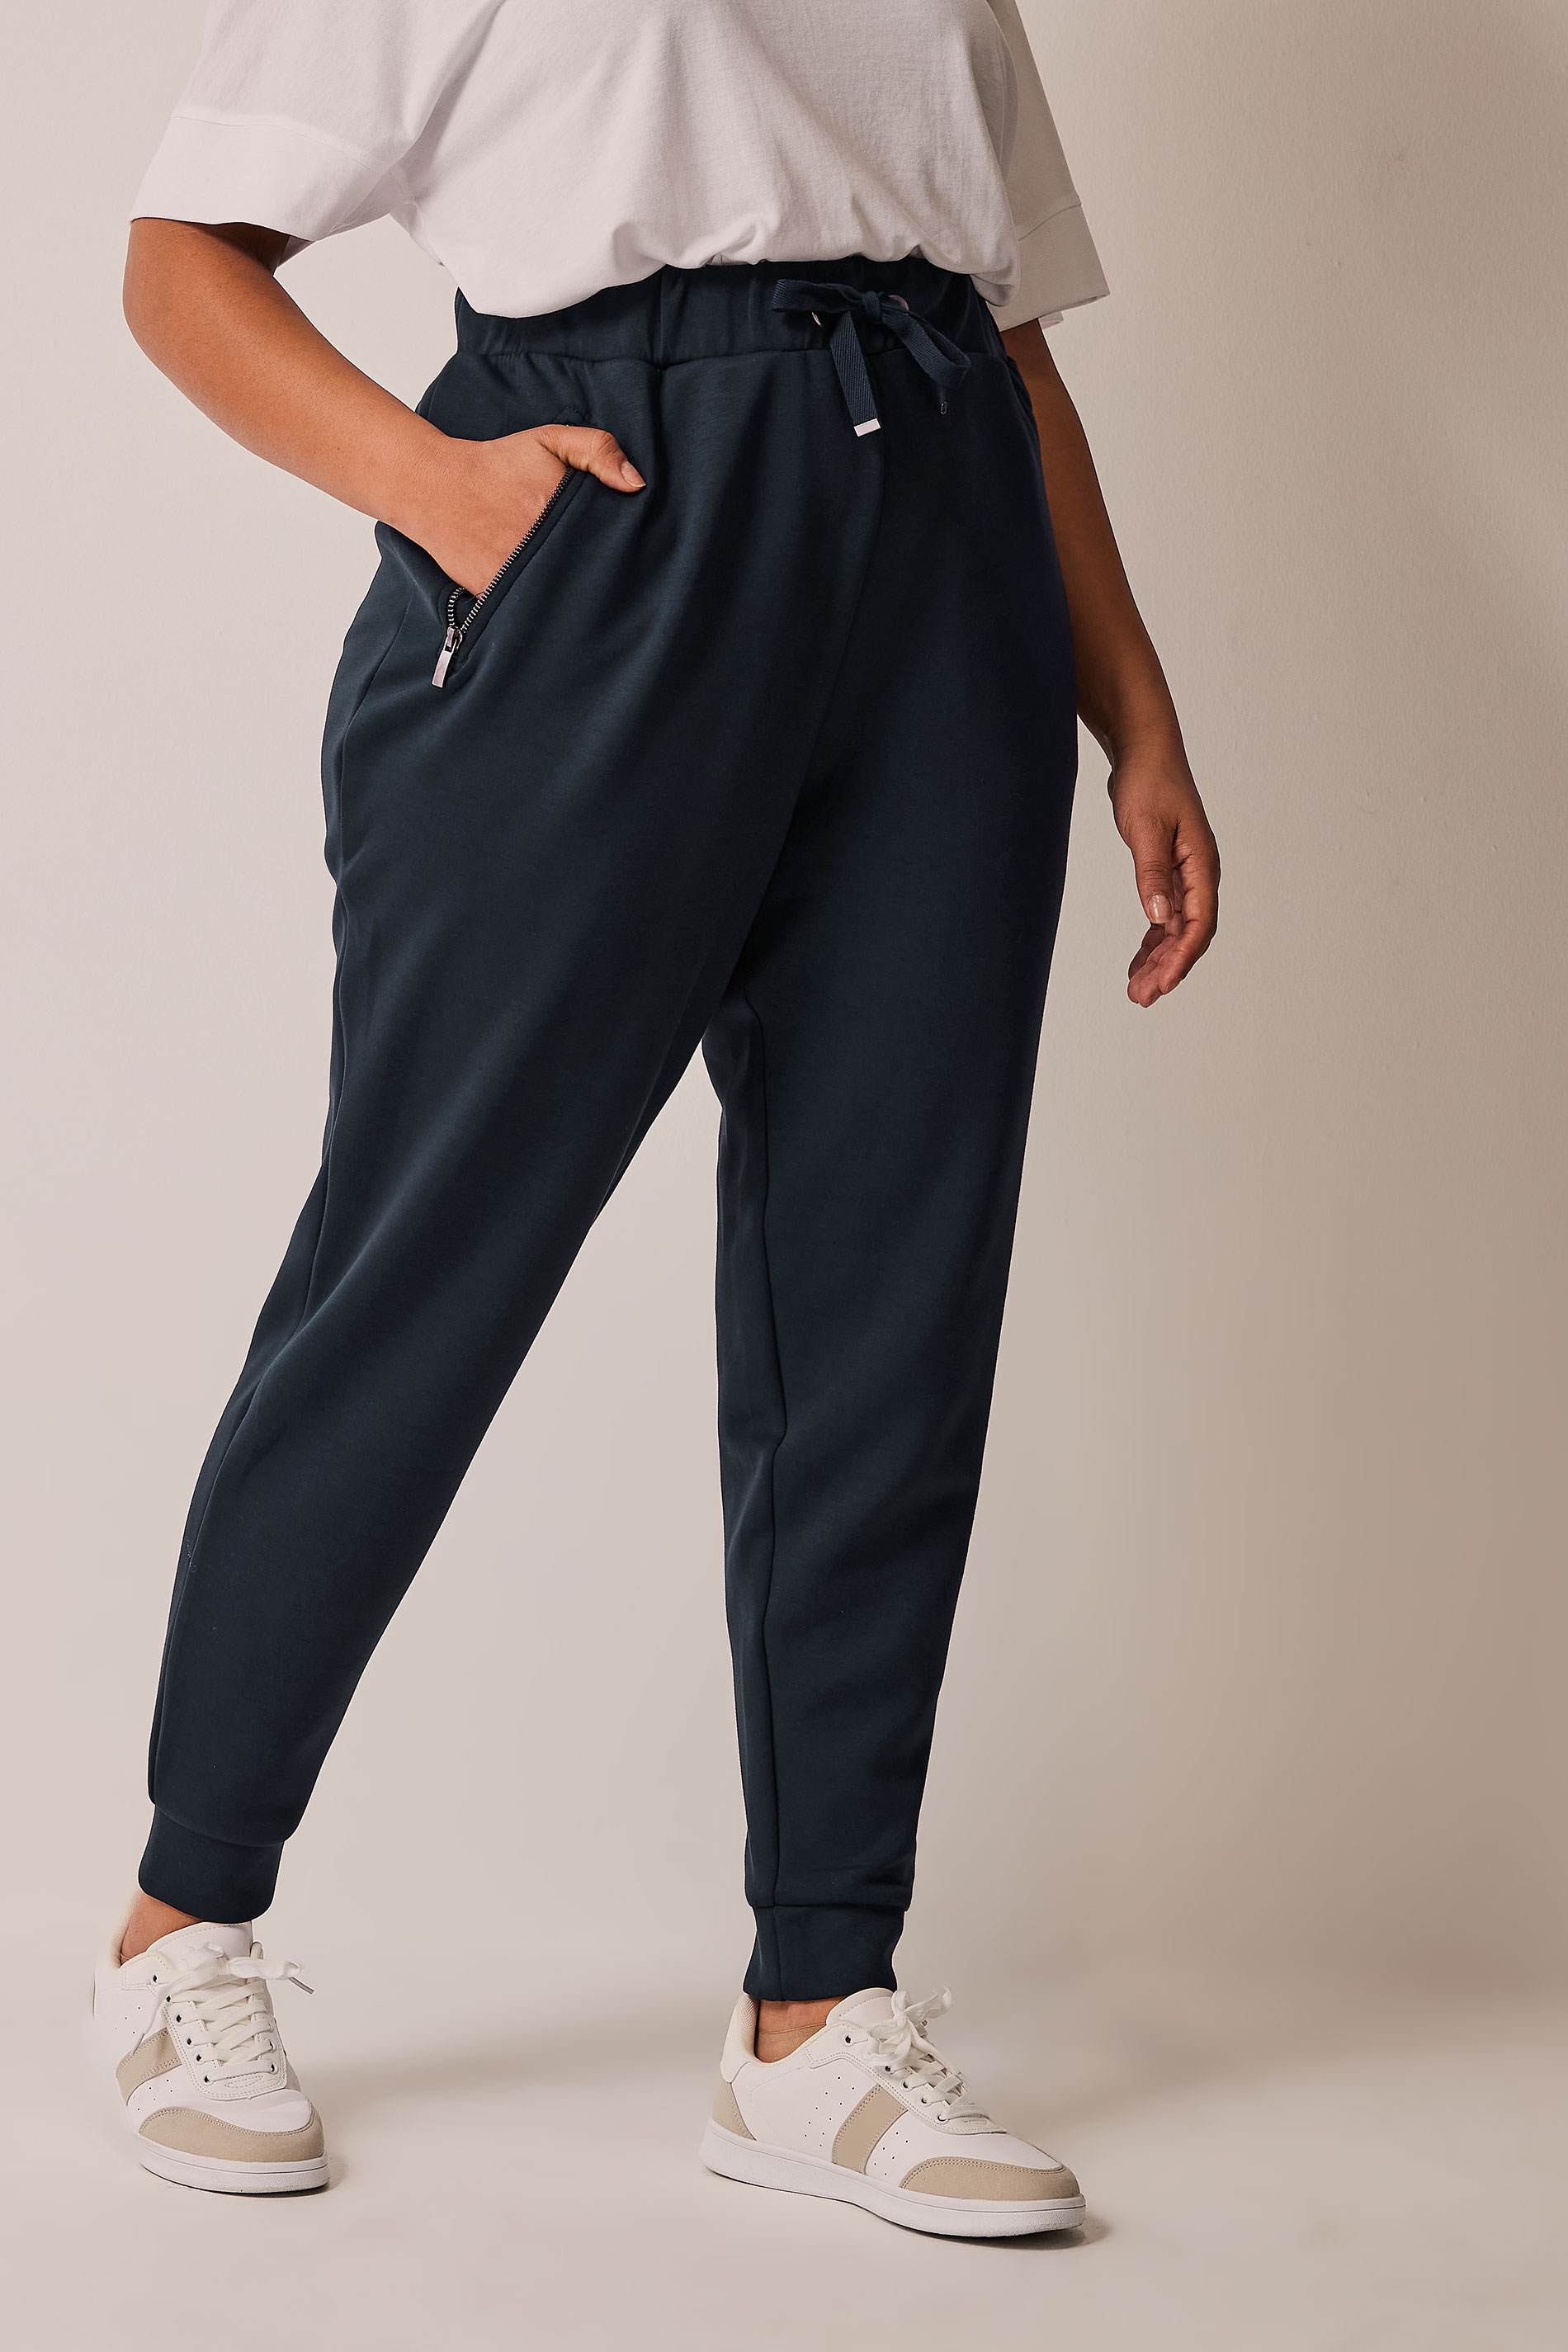 EVANS Plus Size Navy Blue Tapered Joggers | Evans 1